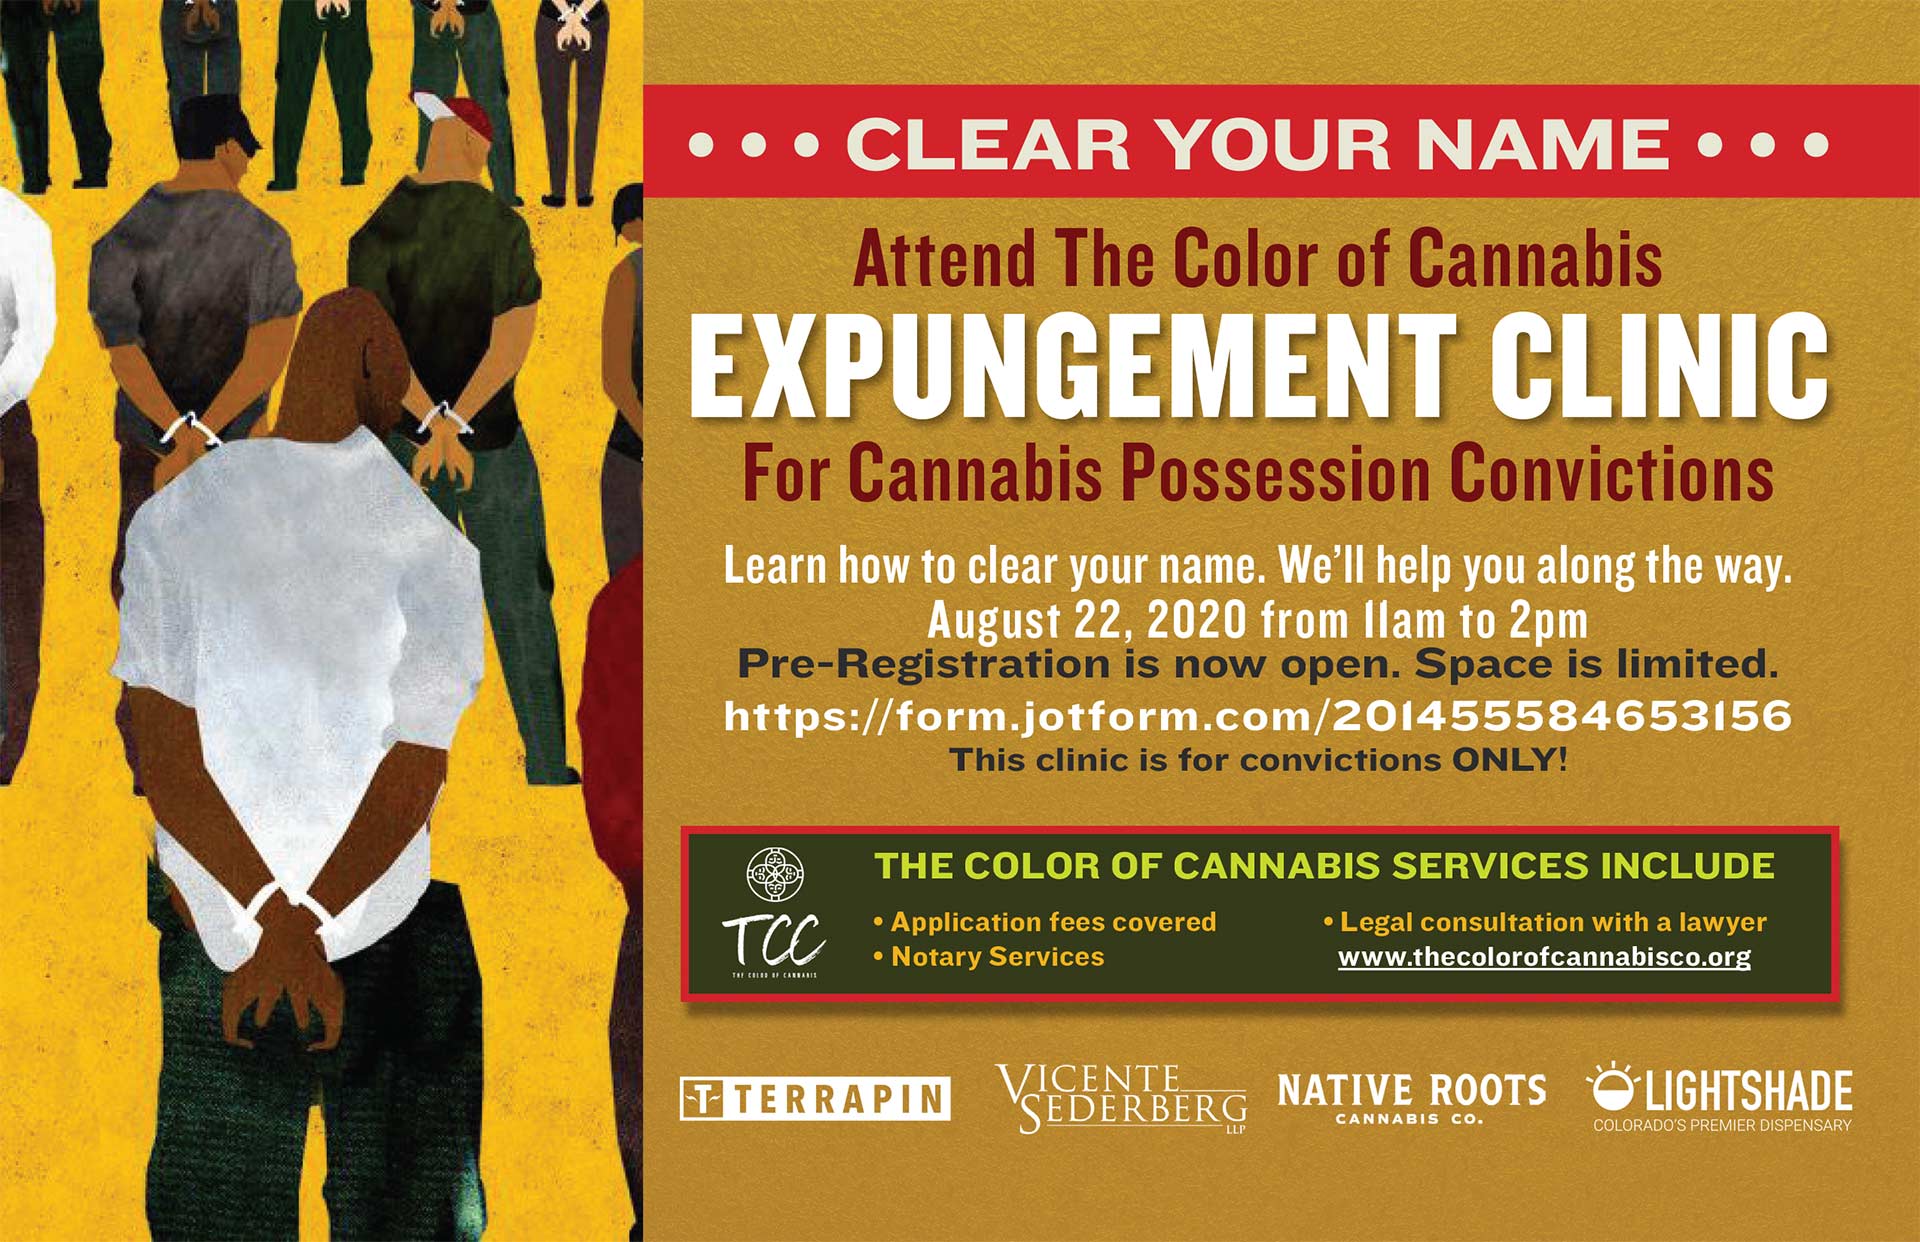 Expungement Clinic - The Color of Cannabis